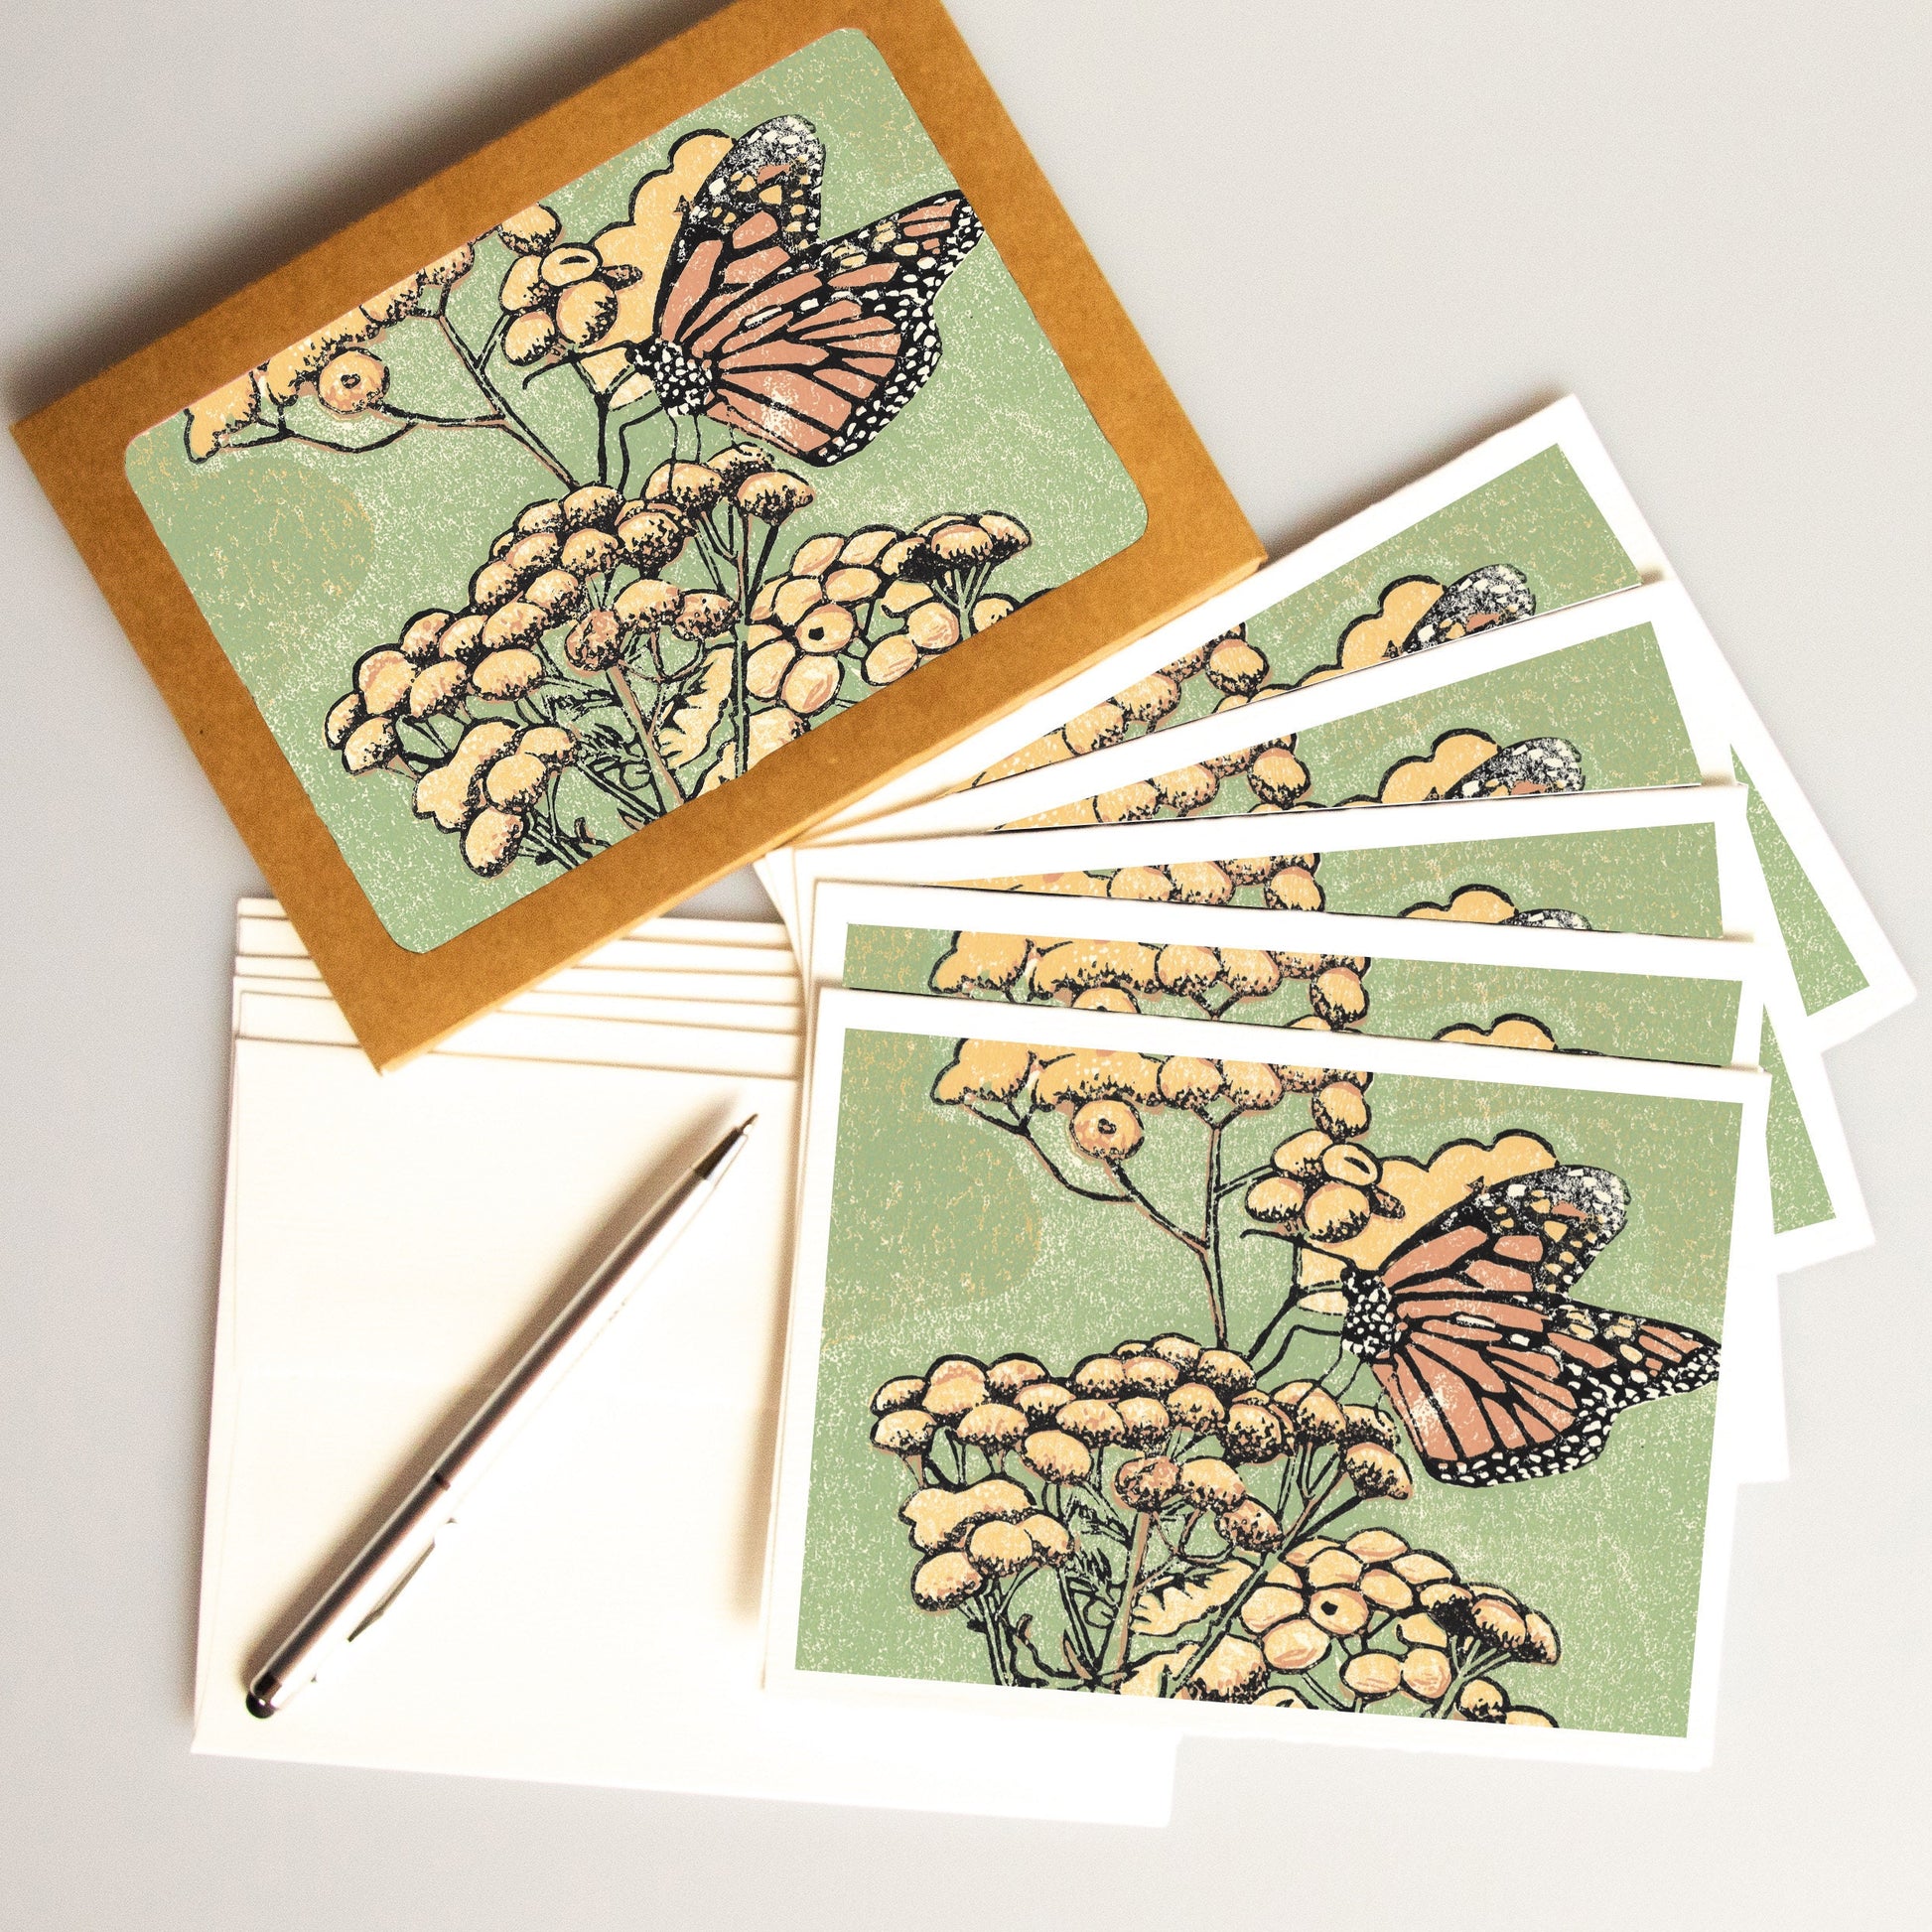 A casually elegant card set featuring monarch butterfly art by Natalia Wohletz titled Monarch on Tansy.